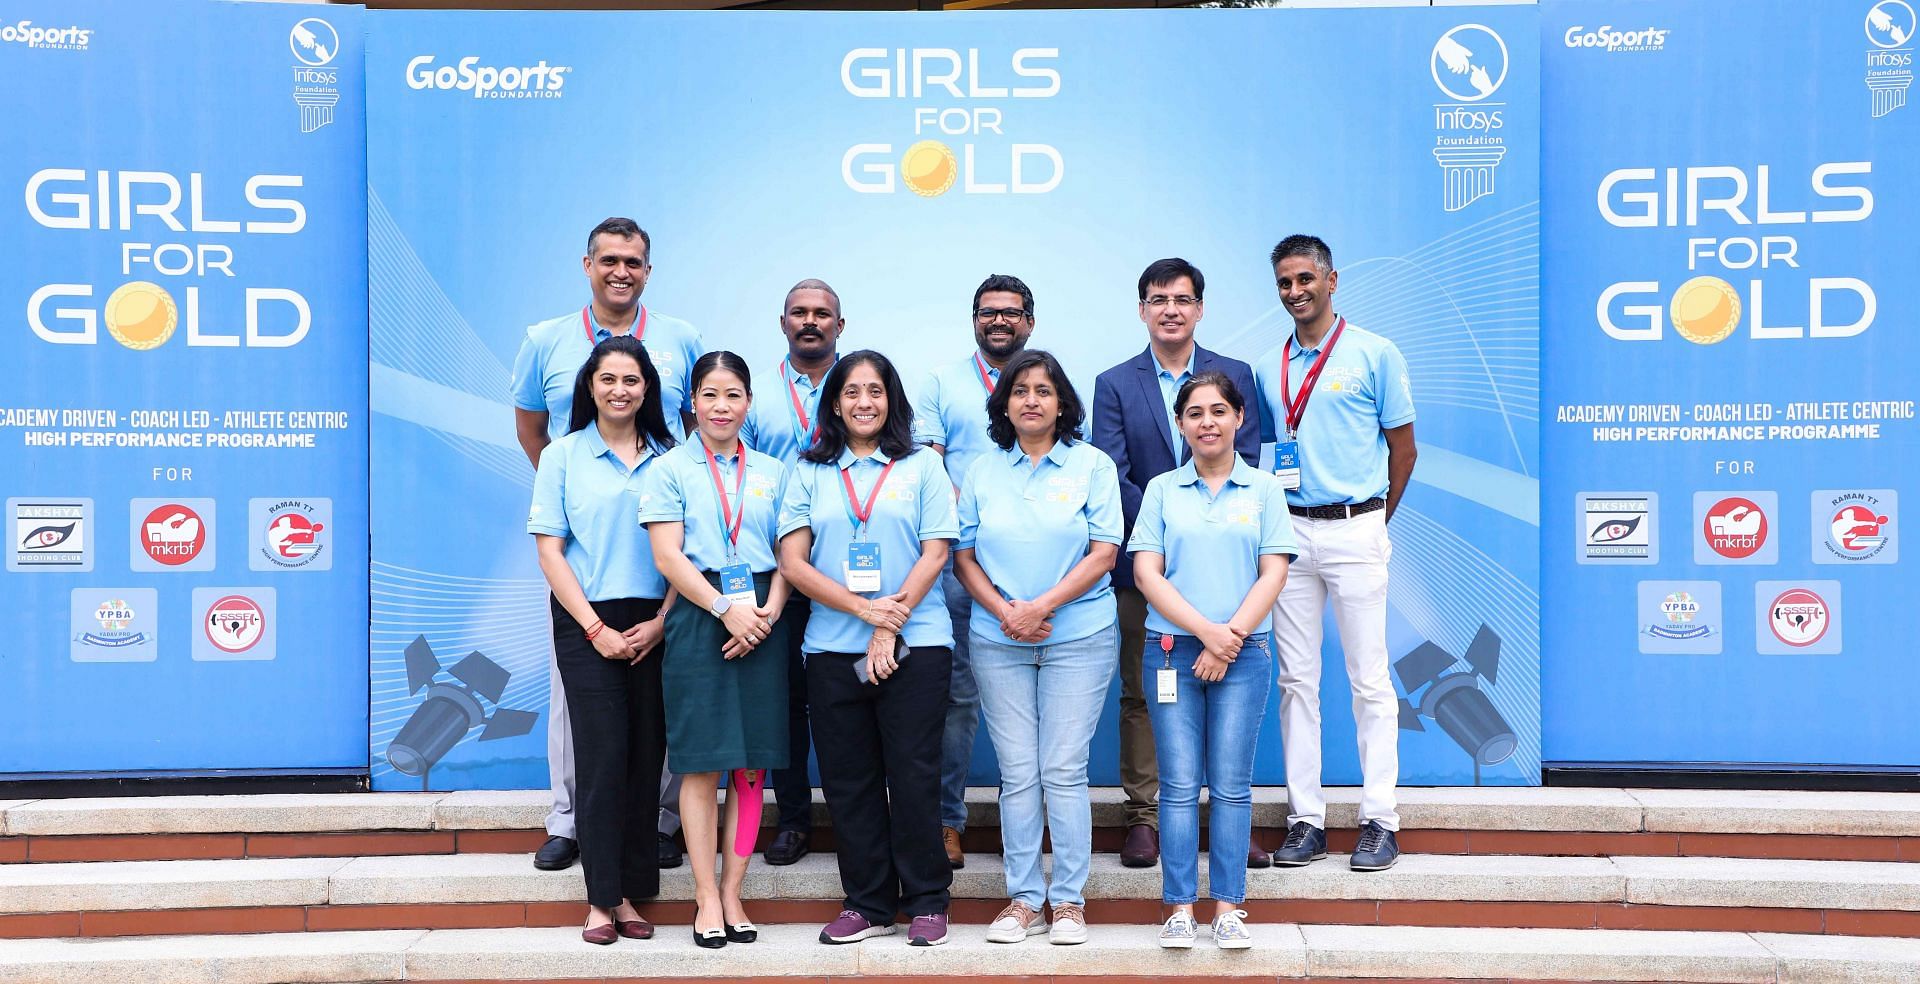 Girls For Gold program launched in Bengaluru by GoSports Foundation in association with Infosys Foundation